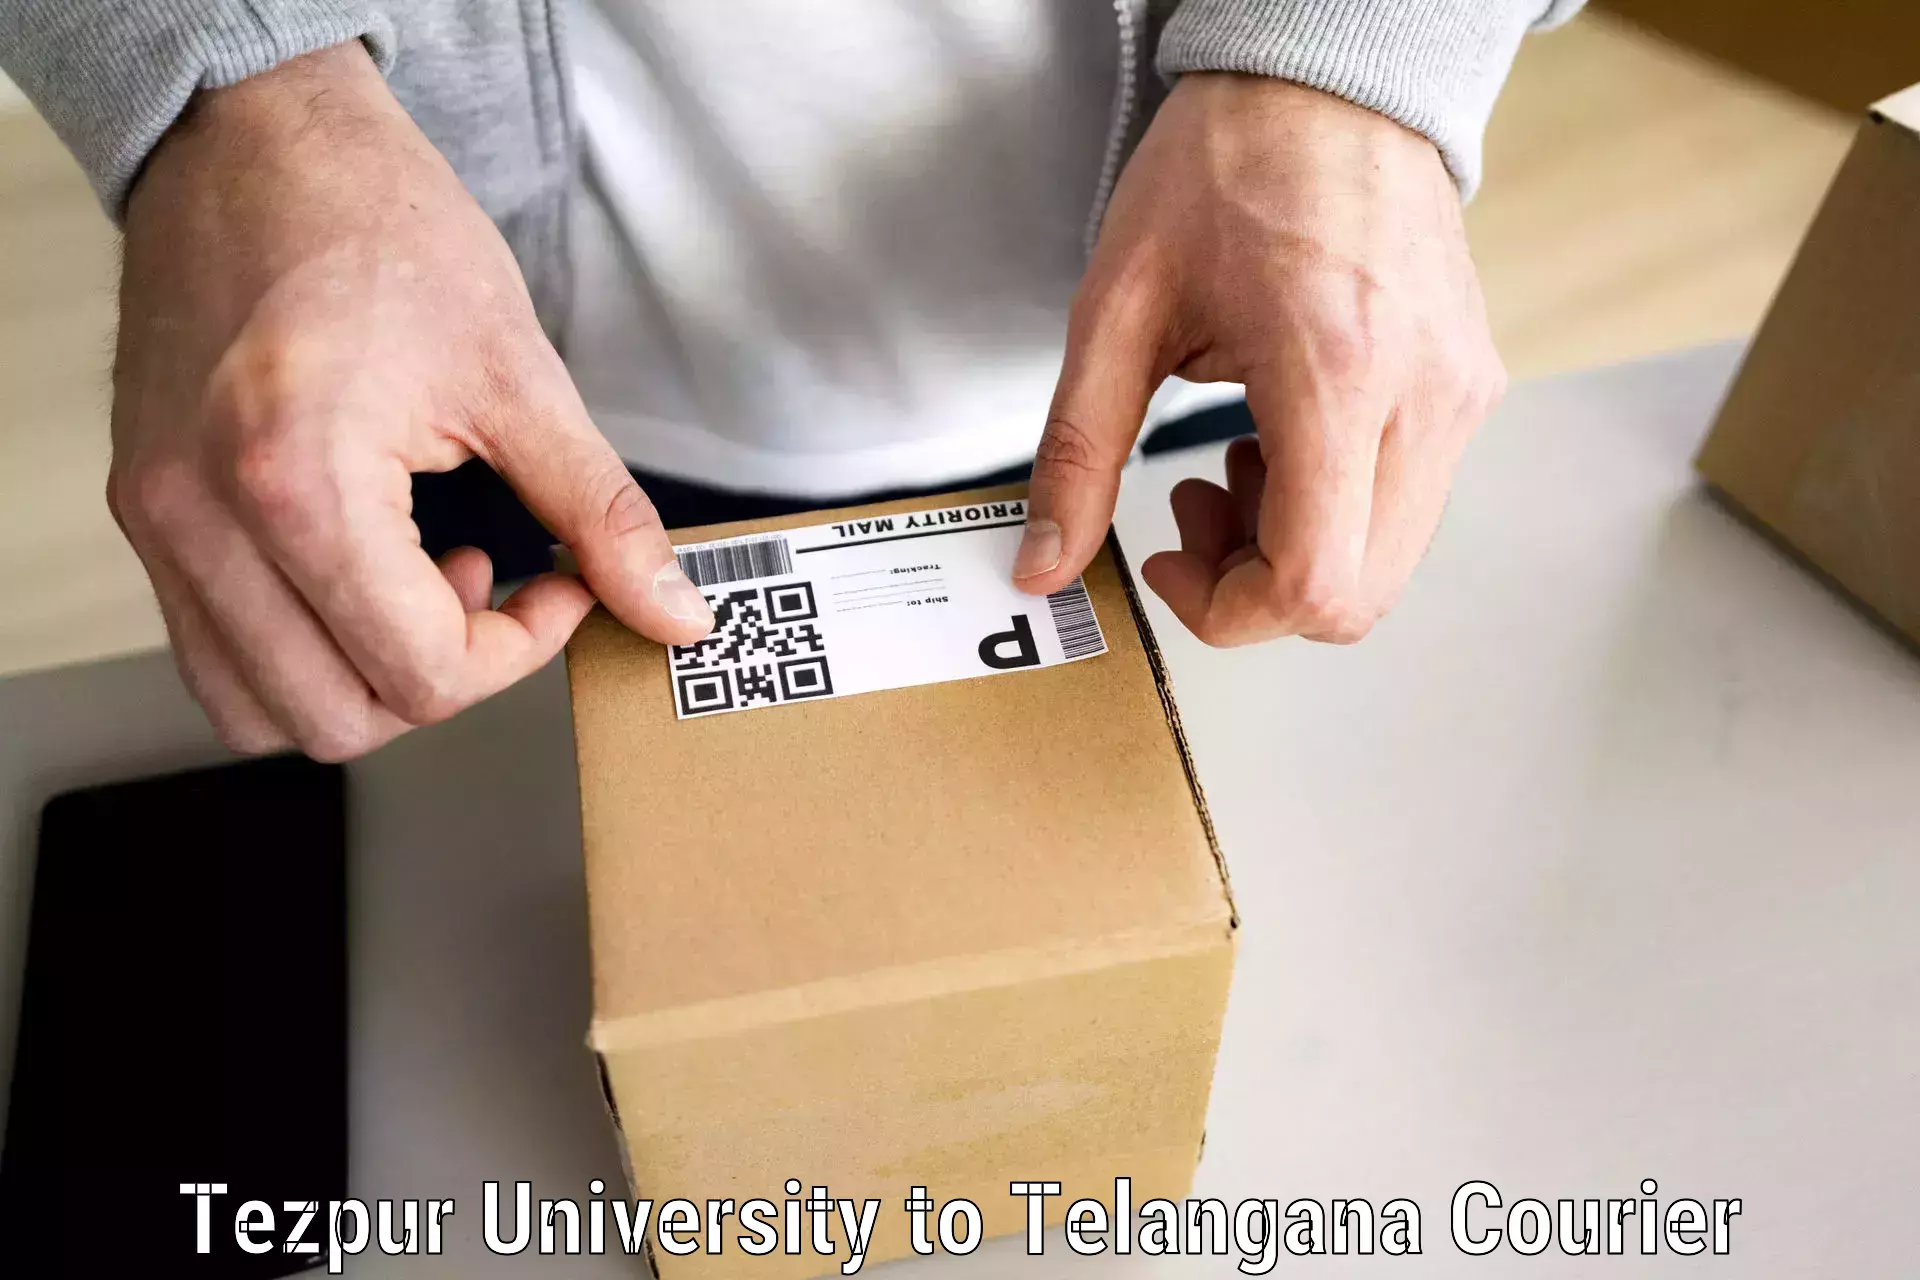 Reliable moving solutions Tezpur University to Ichoda